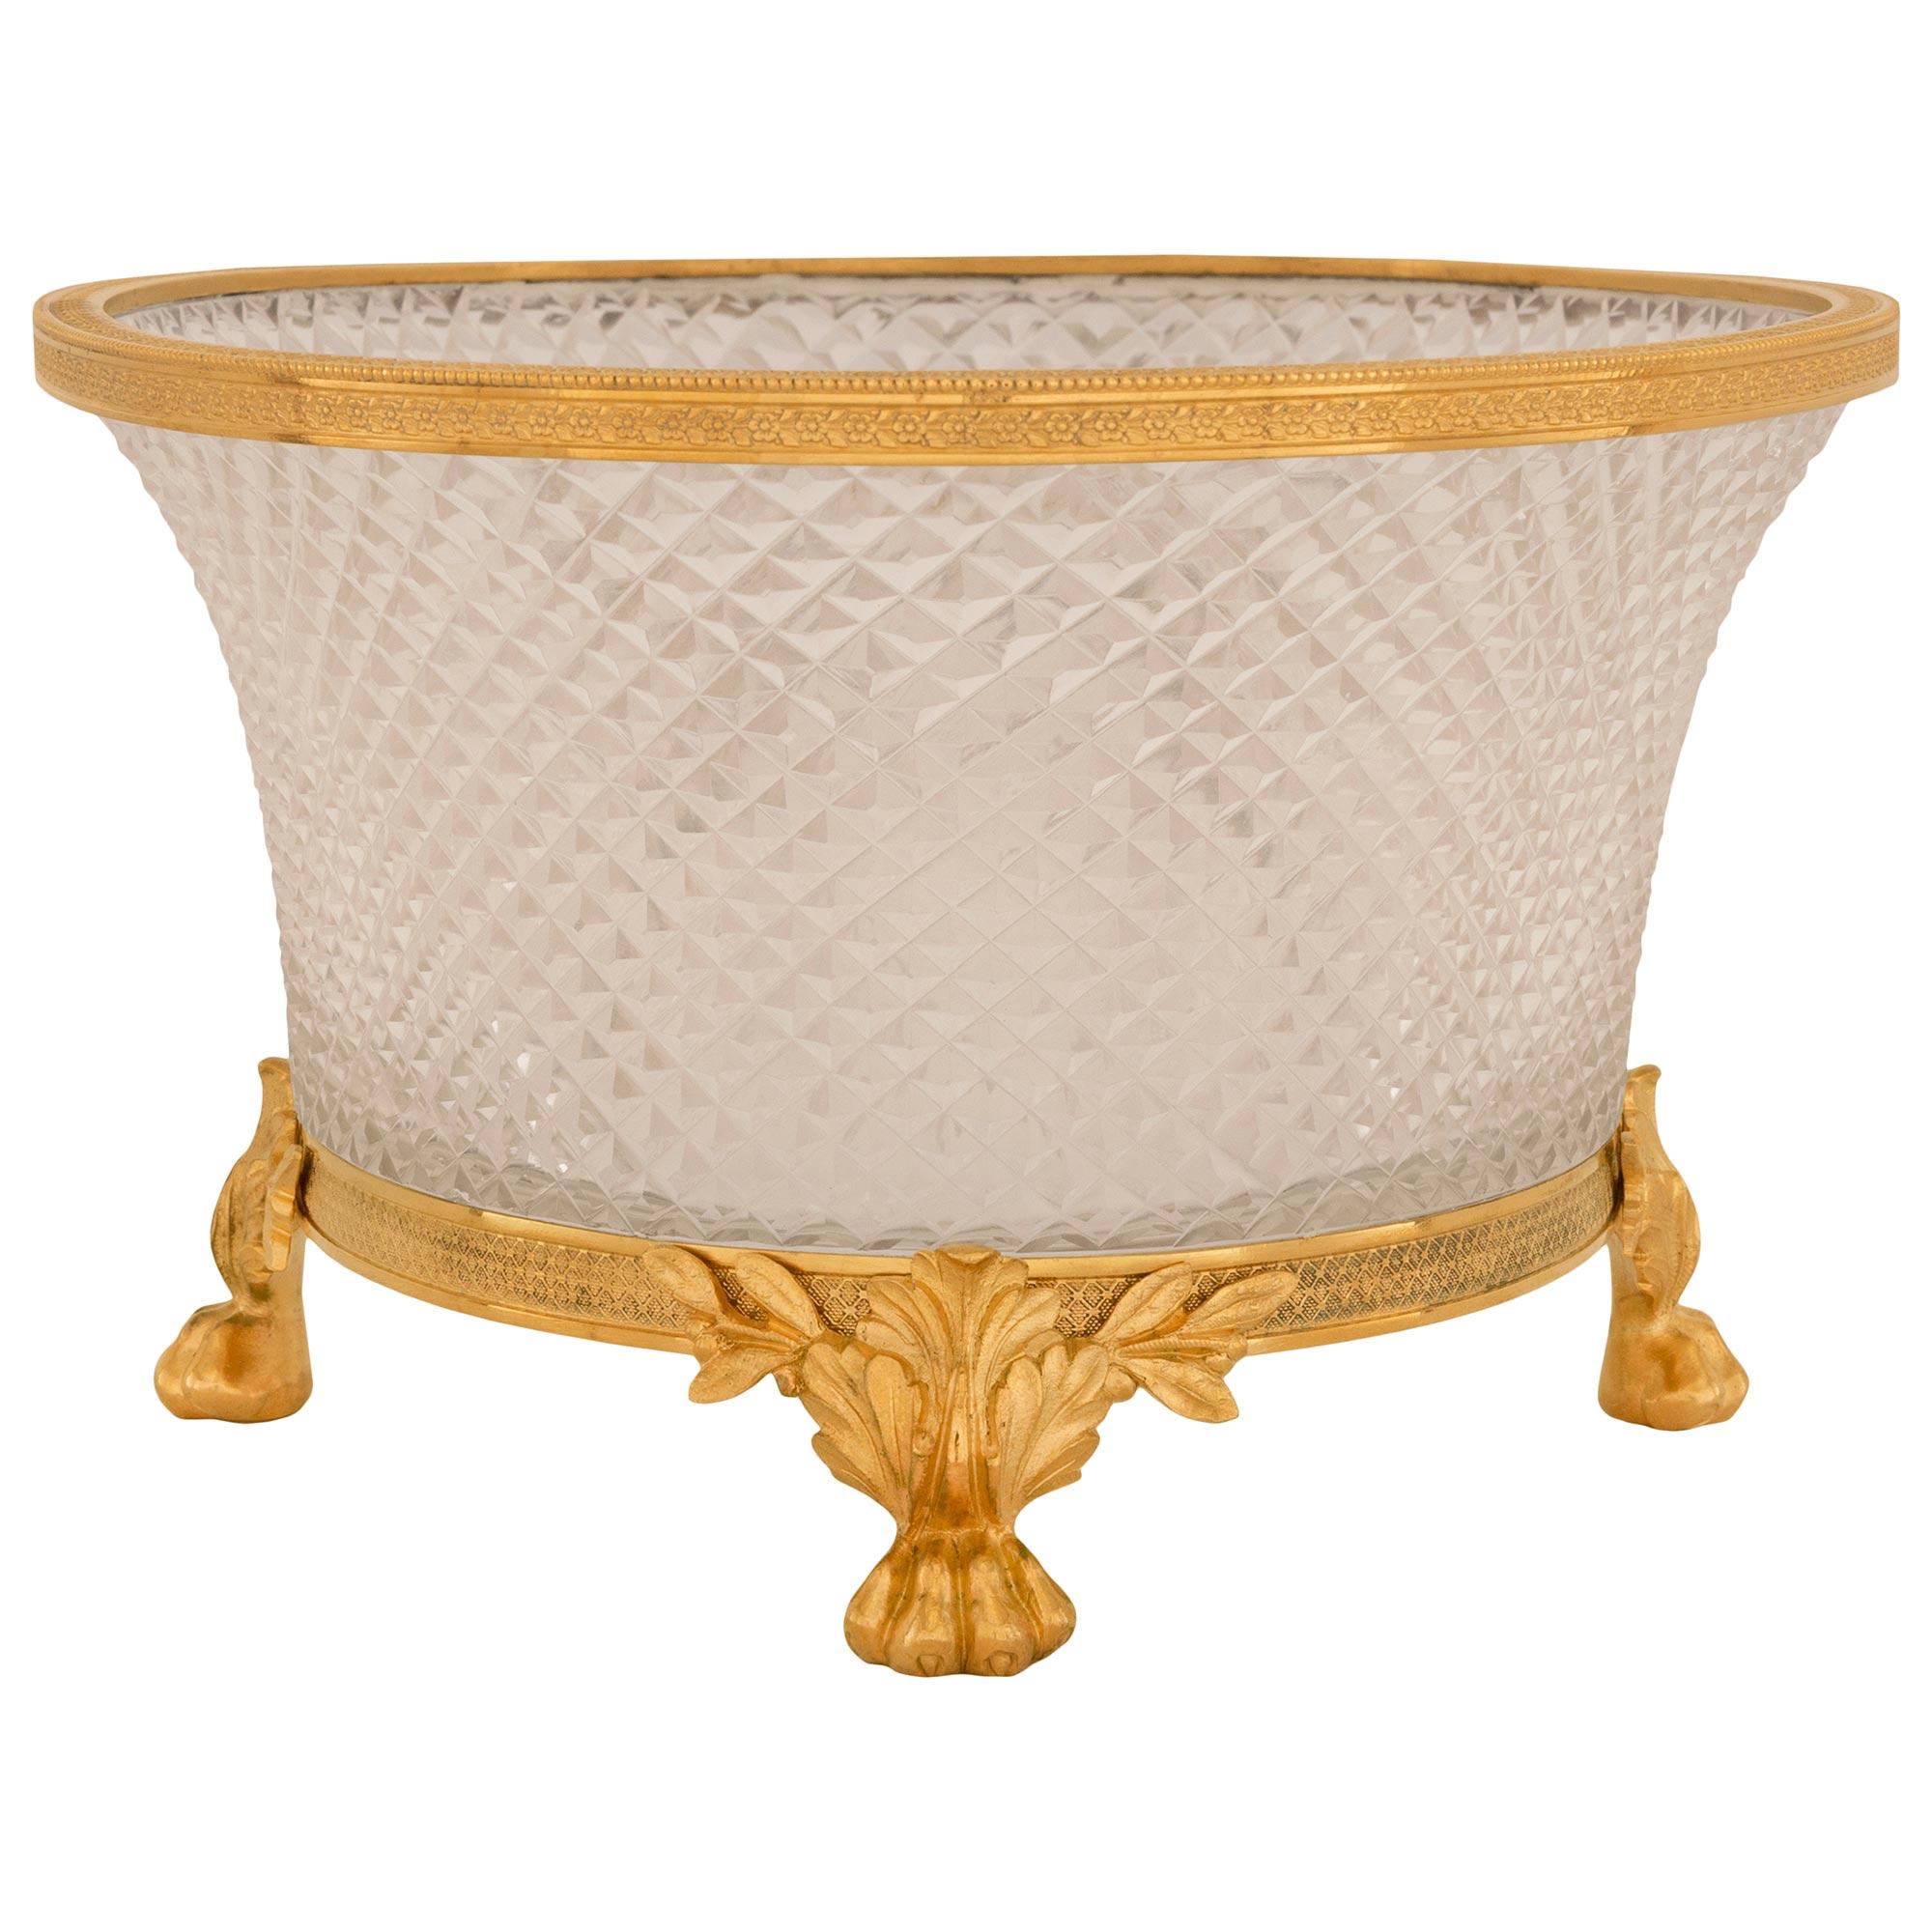 French 19th Century Belle Époque Period Baccarat Crystal and Ormolu Centerpiece 1